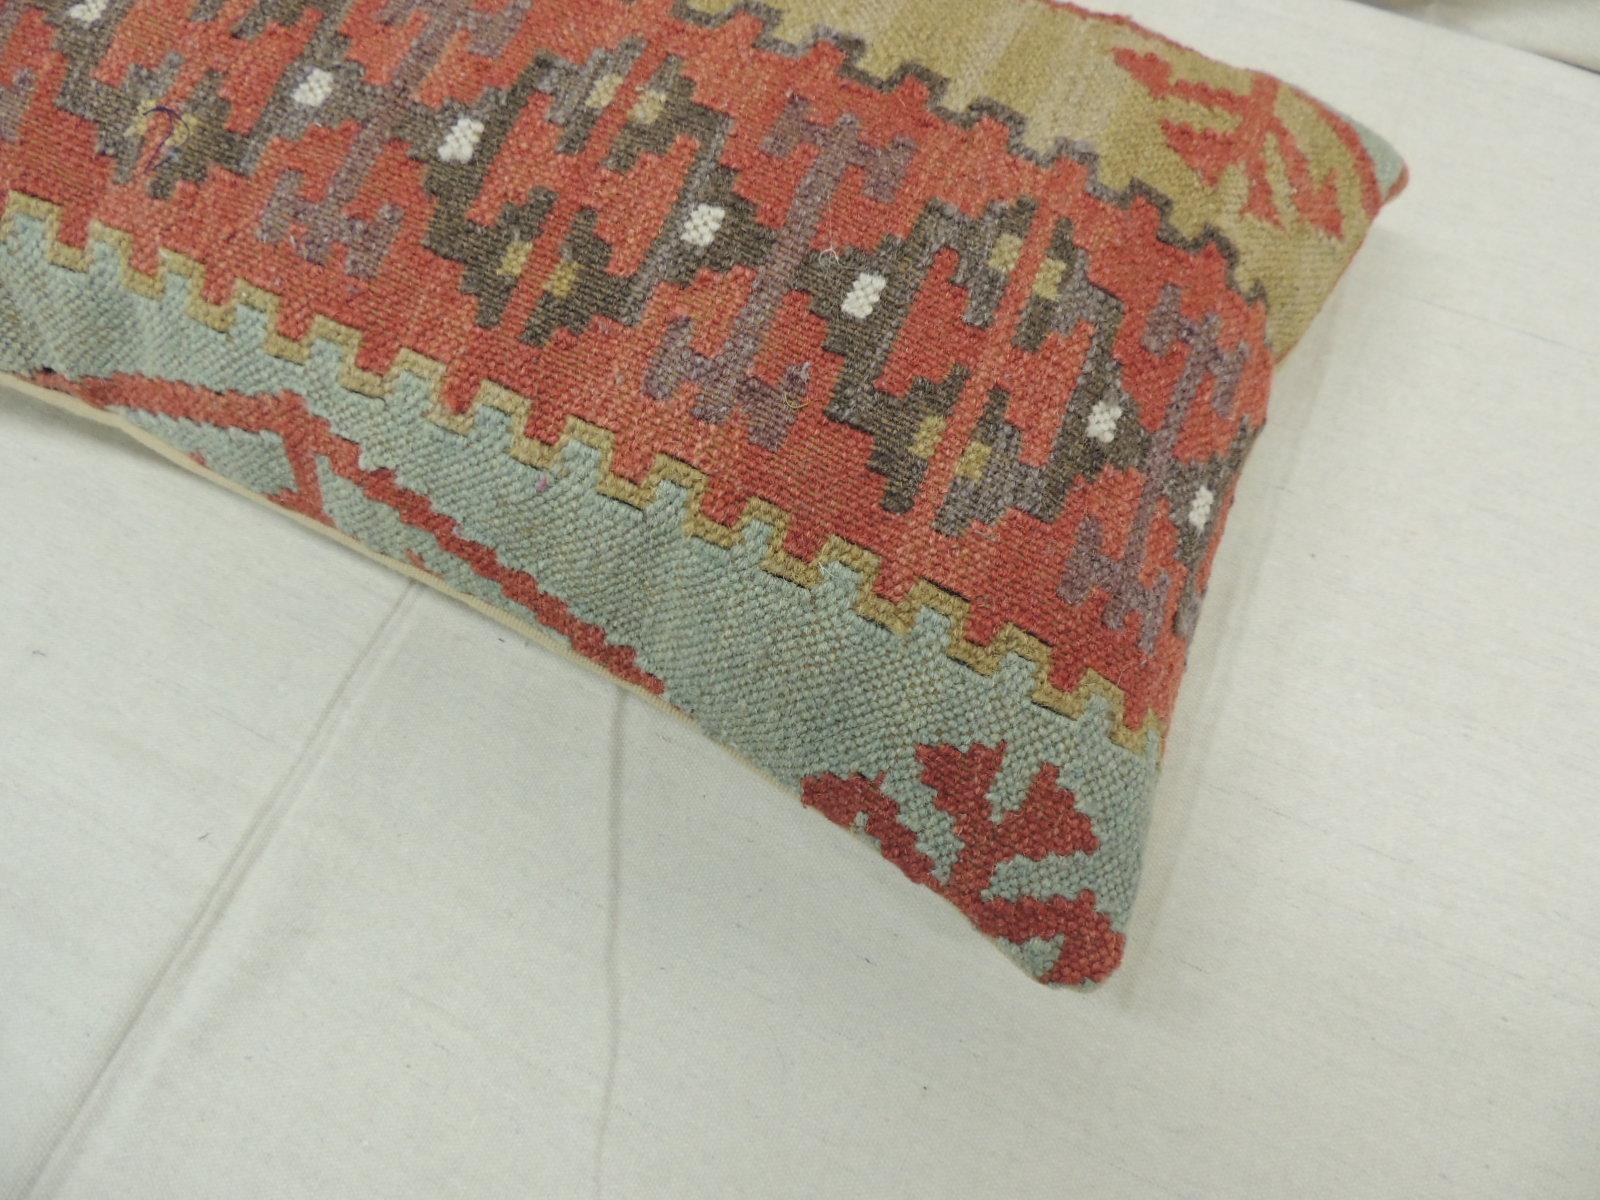 Contemporary Rust and Blue Woven Kilim Decorative Bolster Pillow